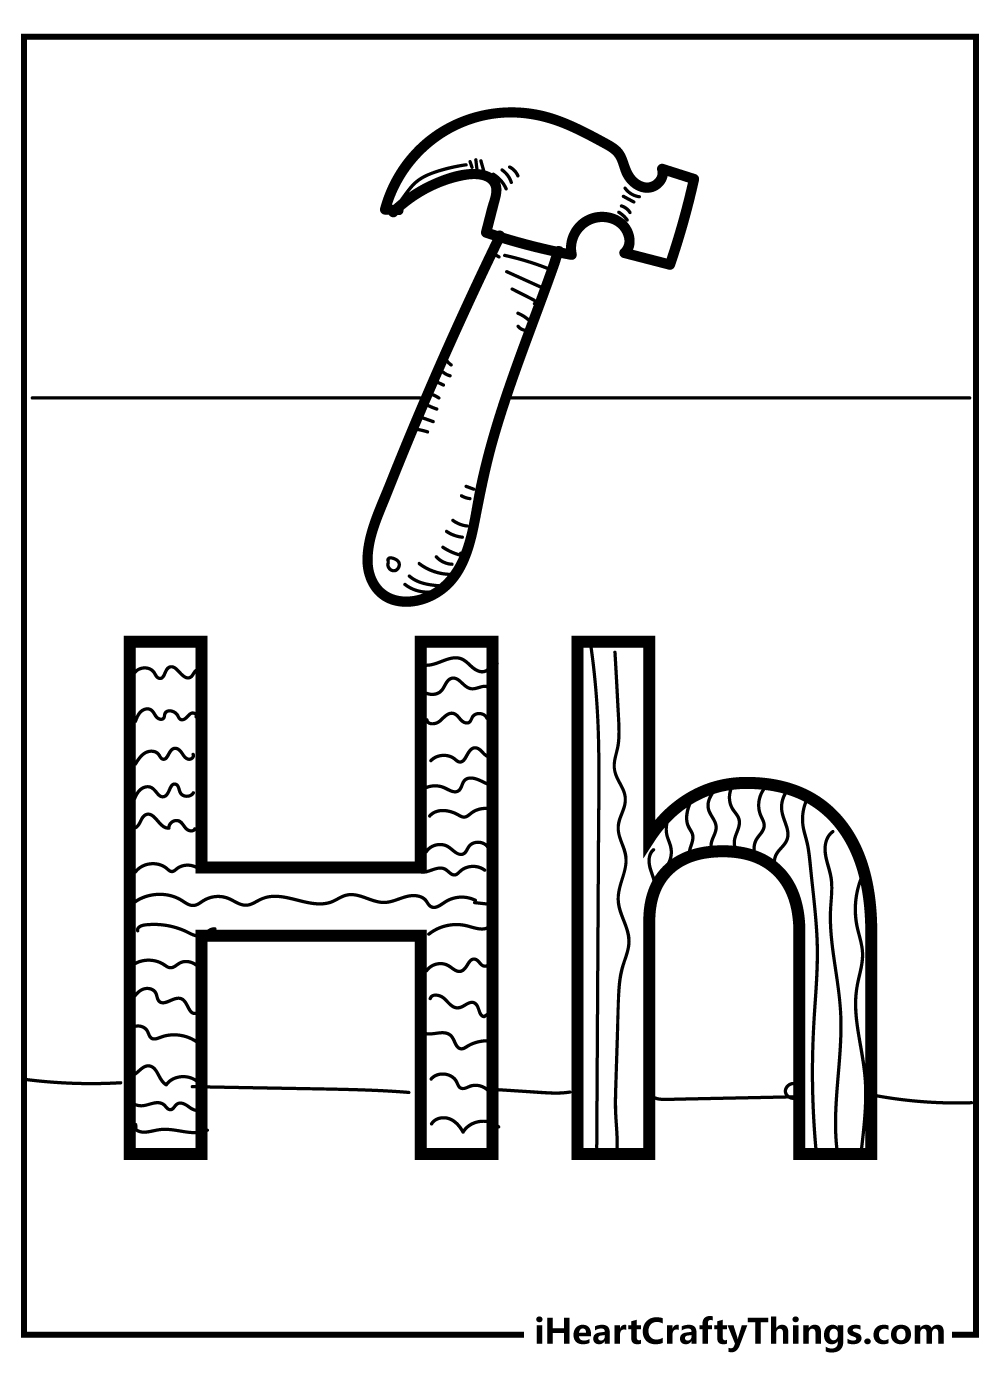 Letter H Coloring Pages for kids free download